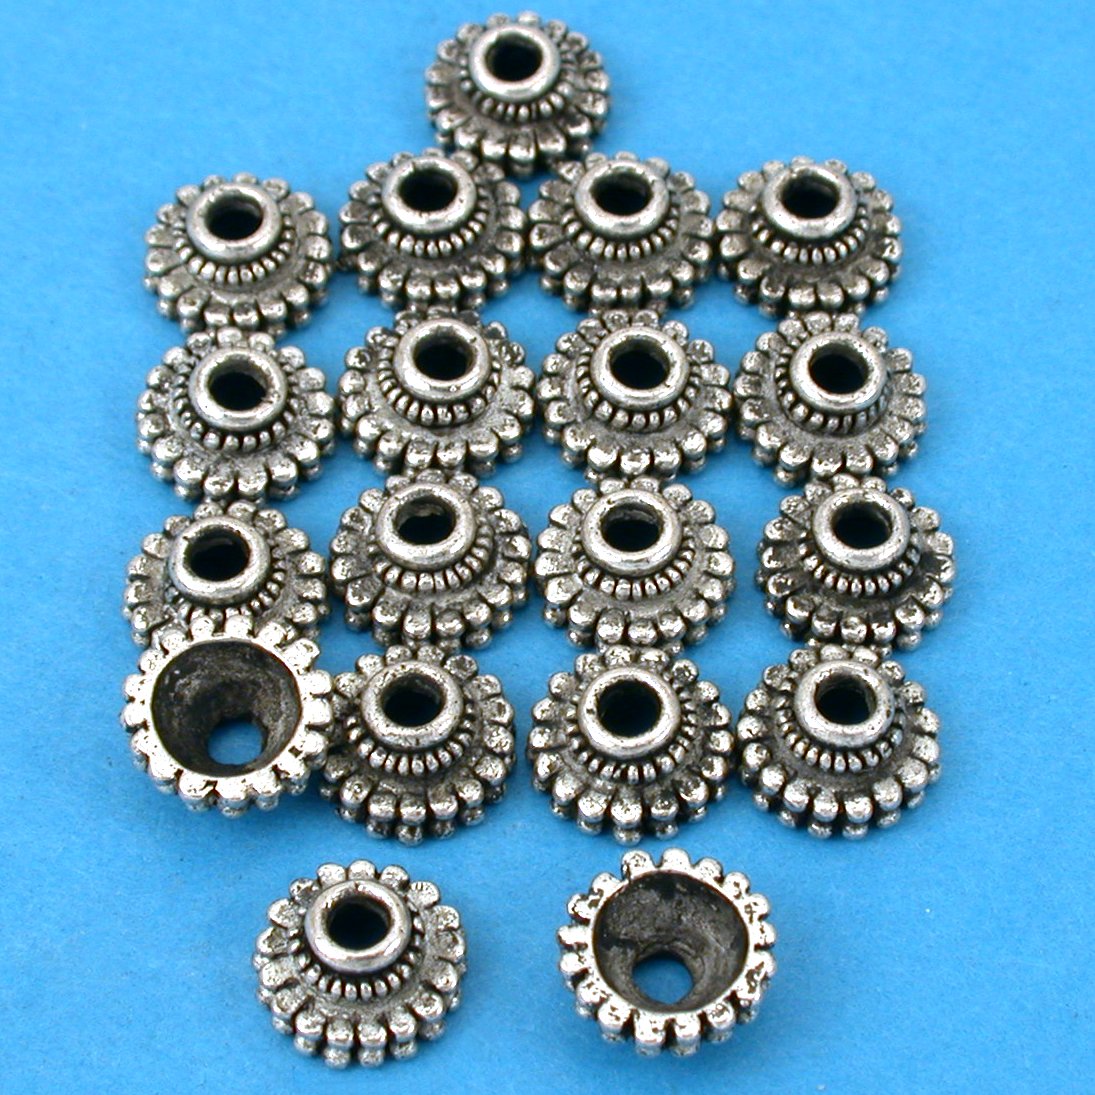 Bali Bead Caps Antique Silver Plated 10mm 15 Grams 18Pcs Approx.